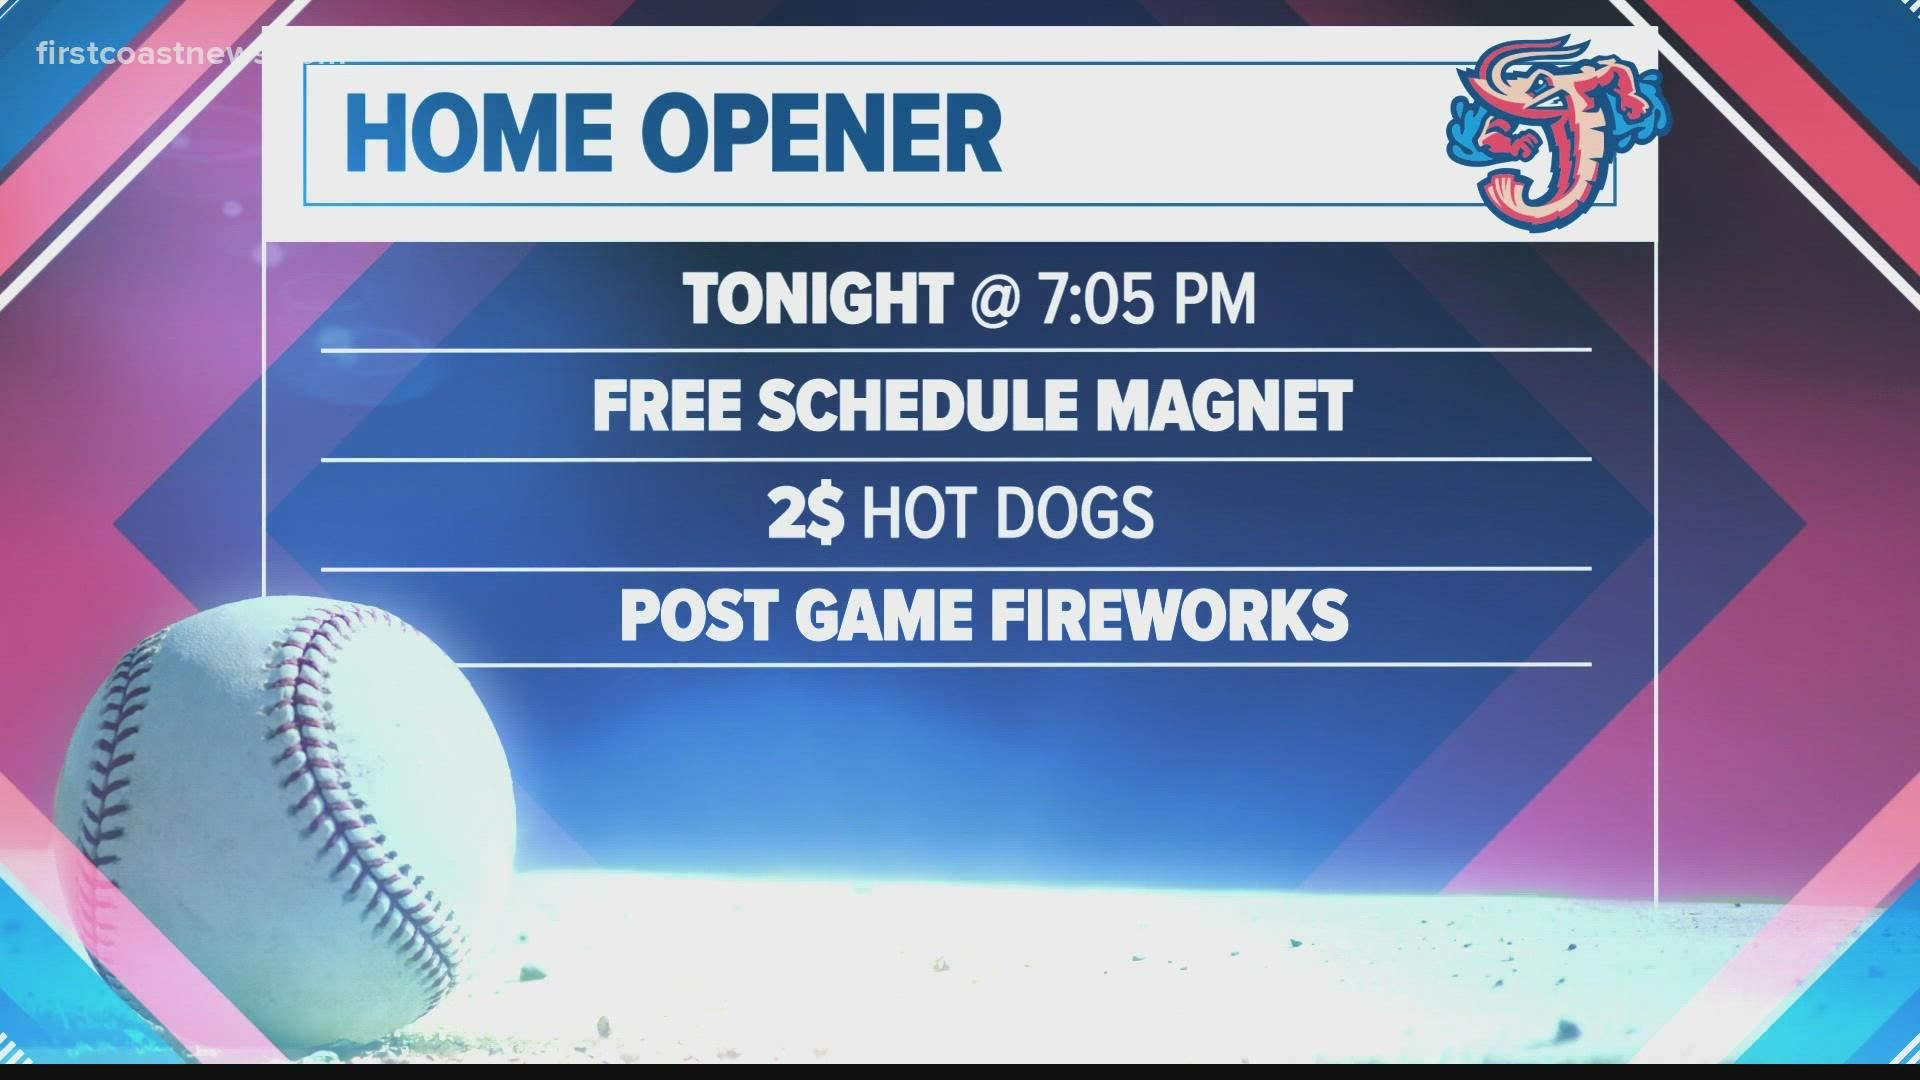 The Jumbo Shrimp are preparing to host their first of a record 75 home games this season, and the fun kicks off with a street festival ahead of the game!